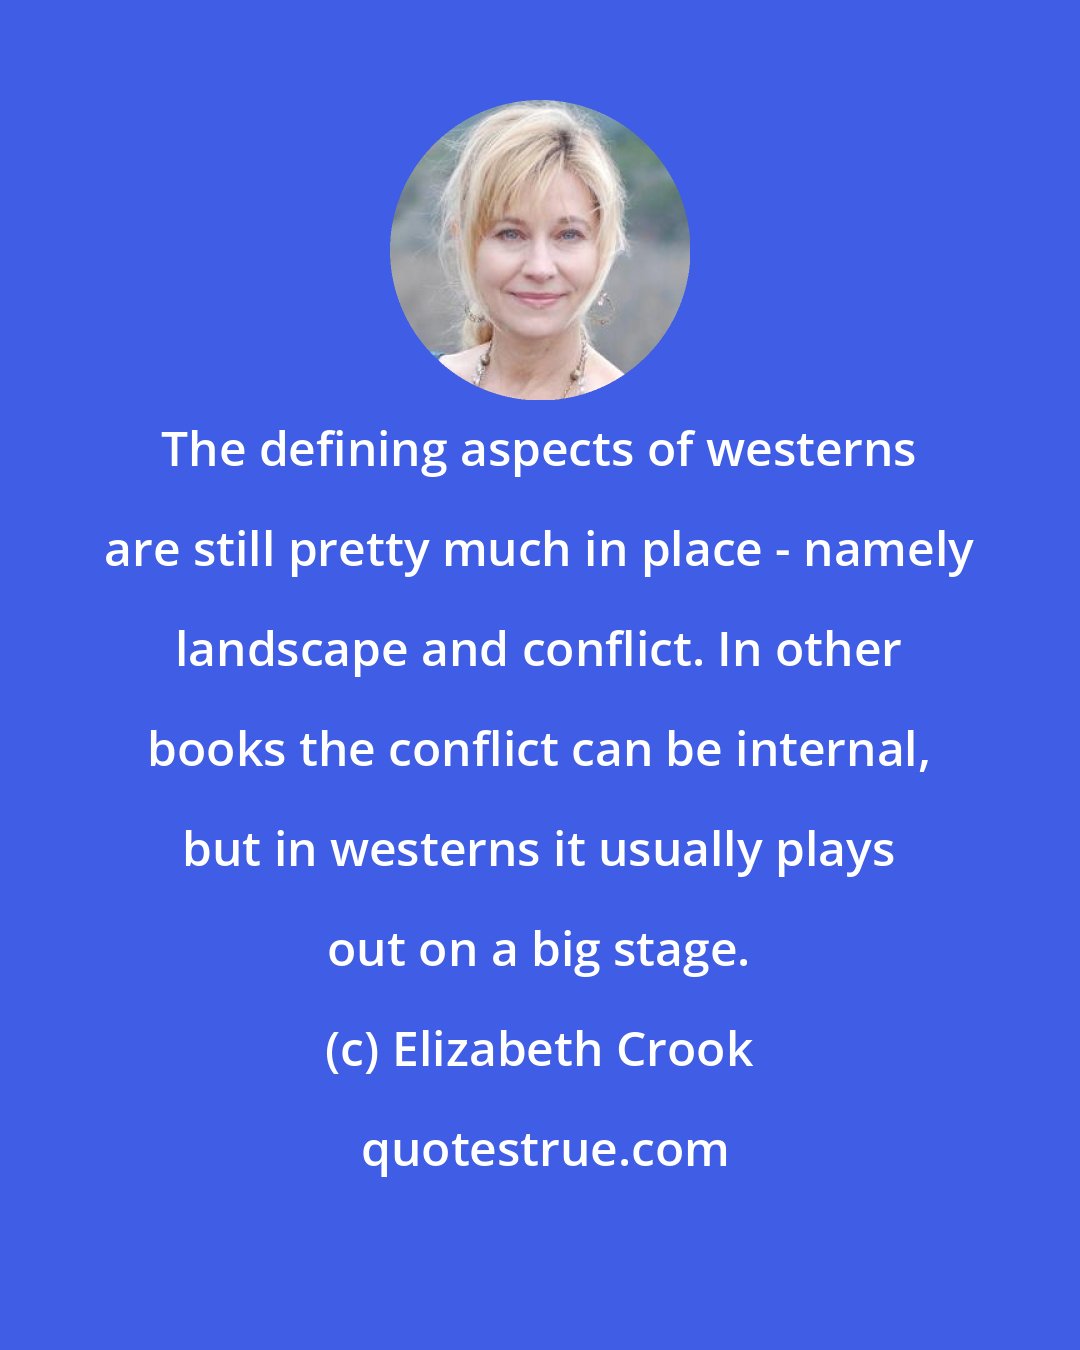 Elizabeth Crook: The defining aspects of westerns are still pretty much in place - namely landscape and conflict. In other books the conflict can be internal, but in westerns it usually plays out on a big stage.